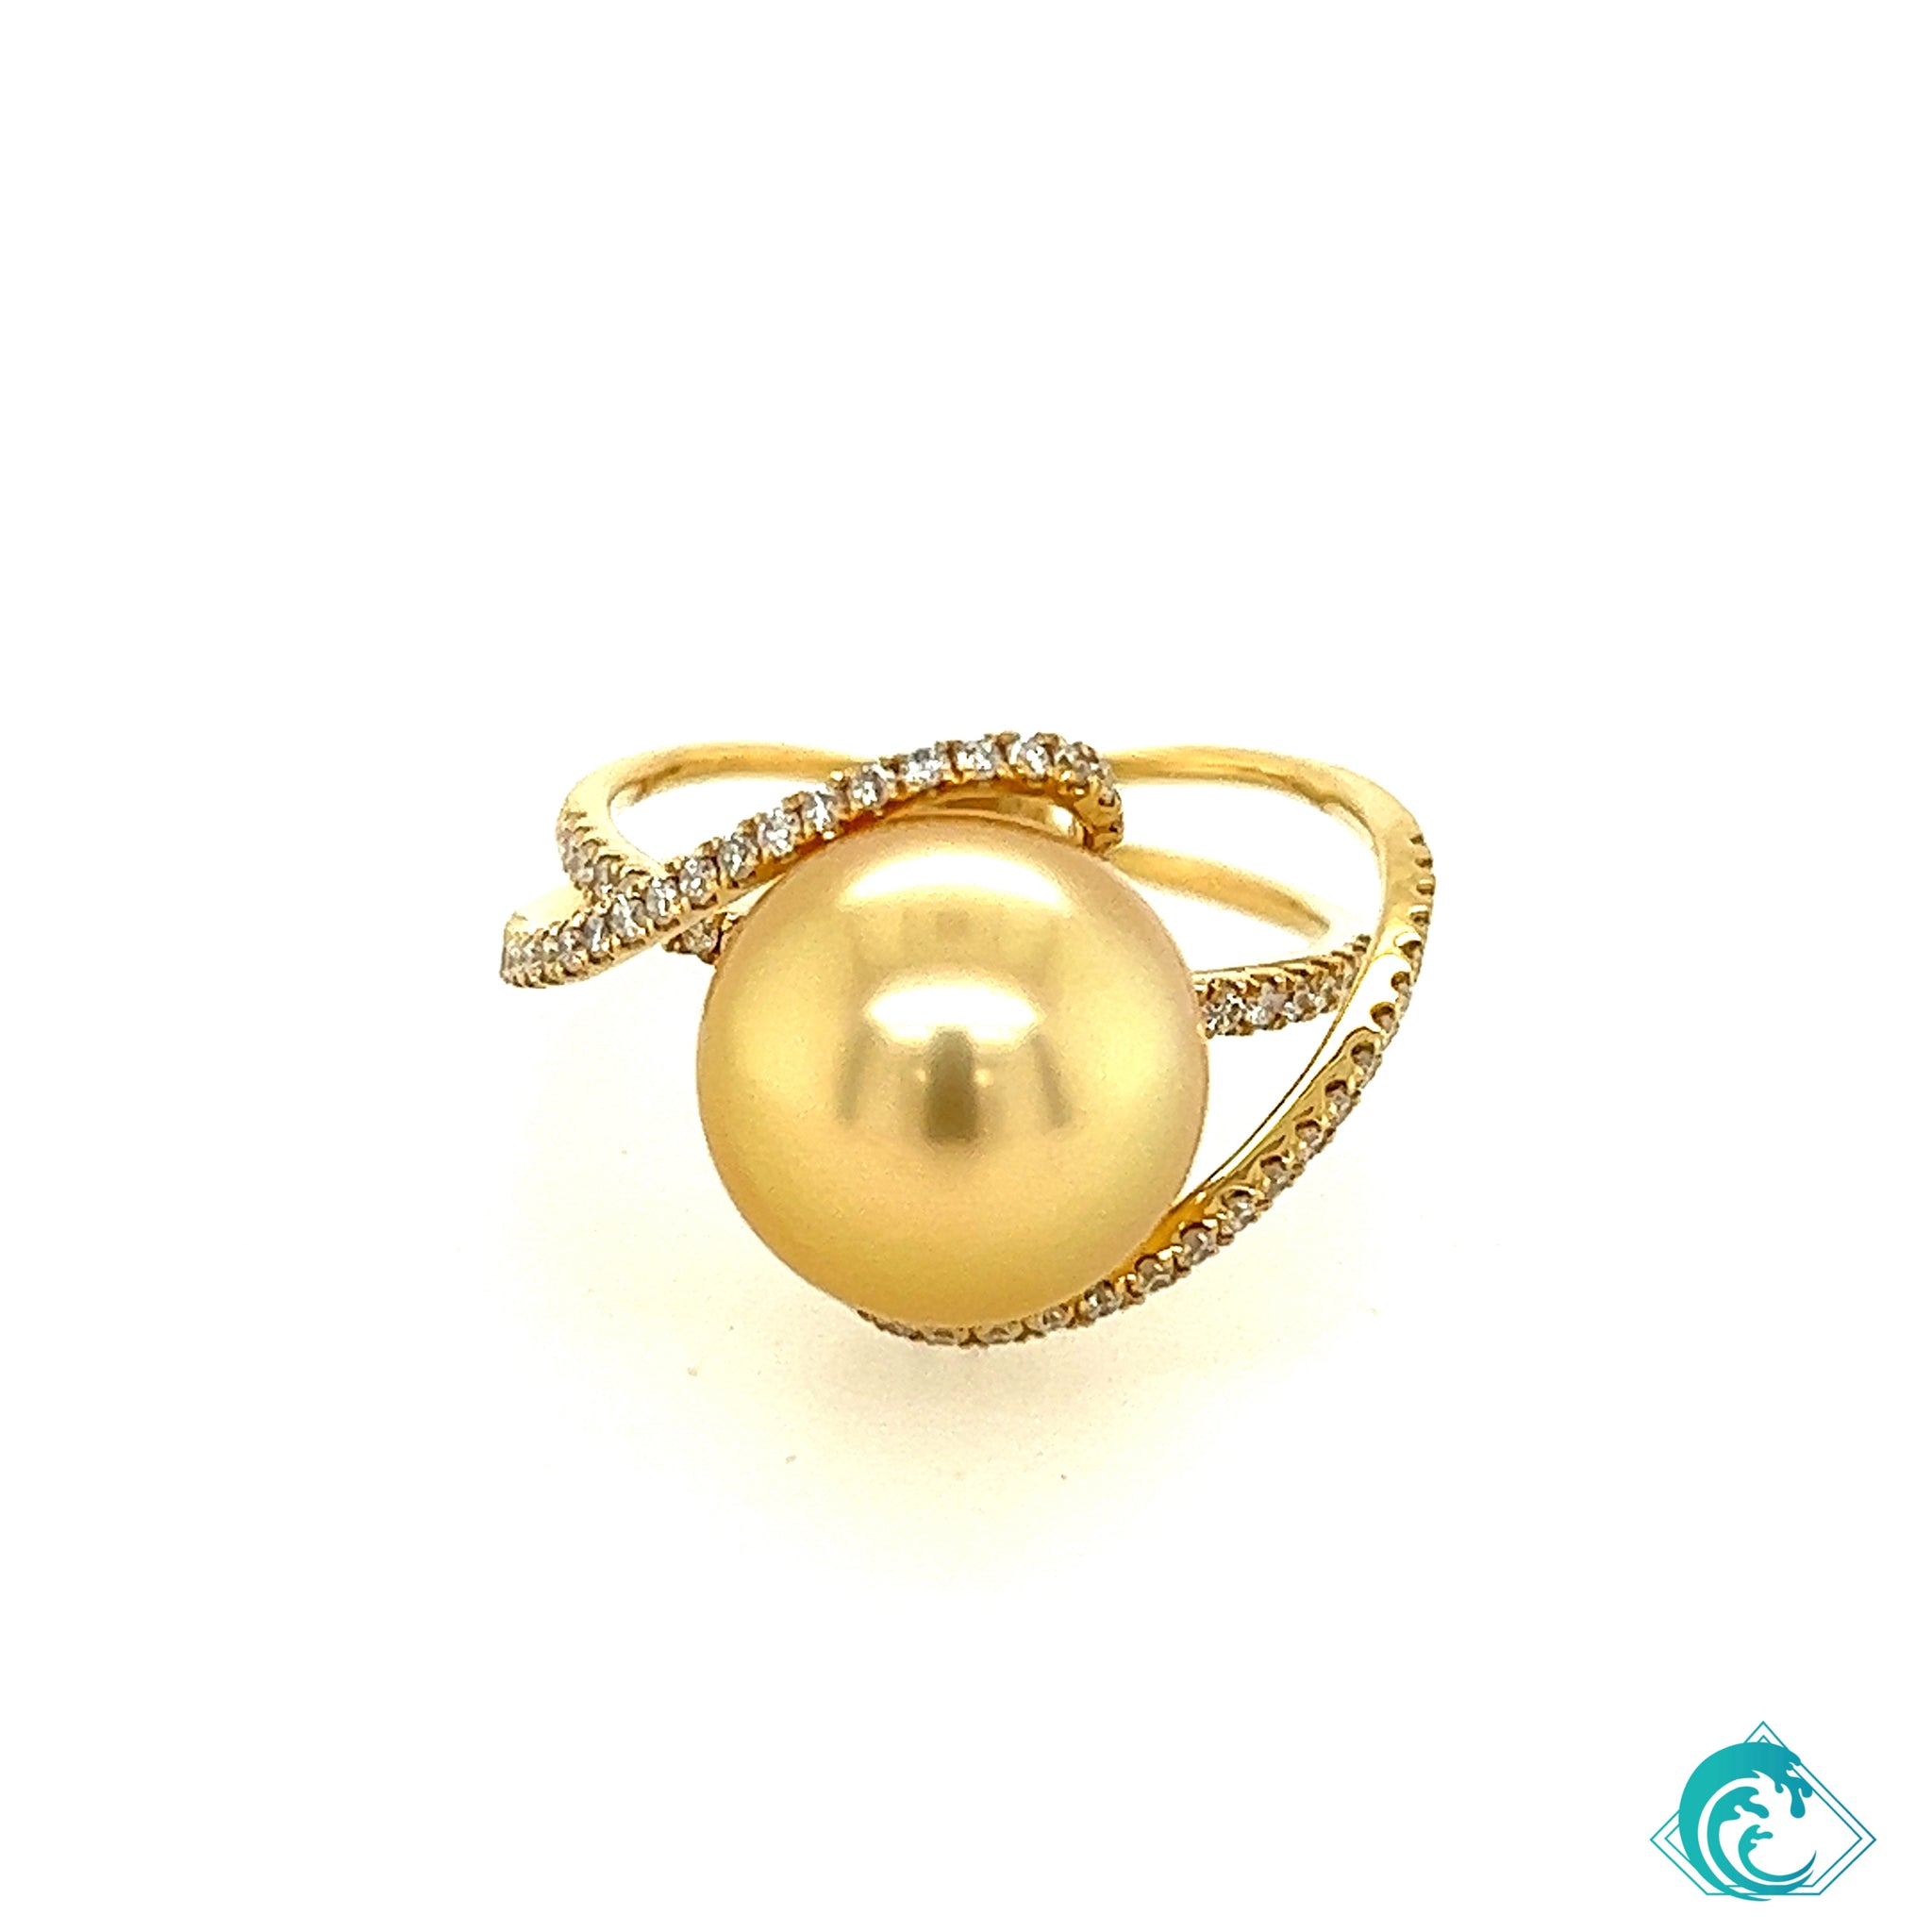 18KY Golden Indonesian Pearl & Diamond Ring